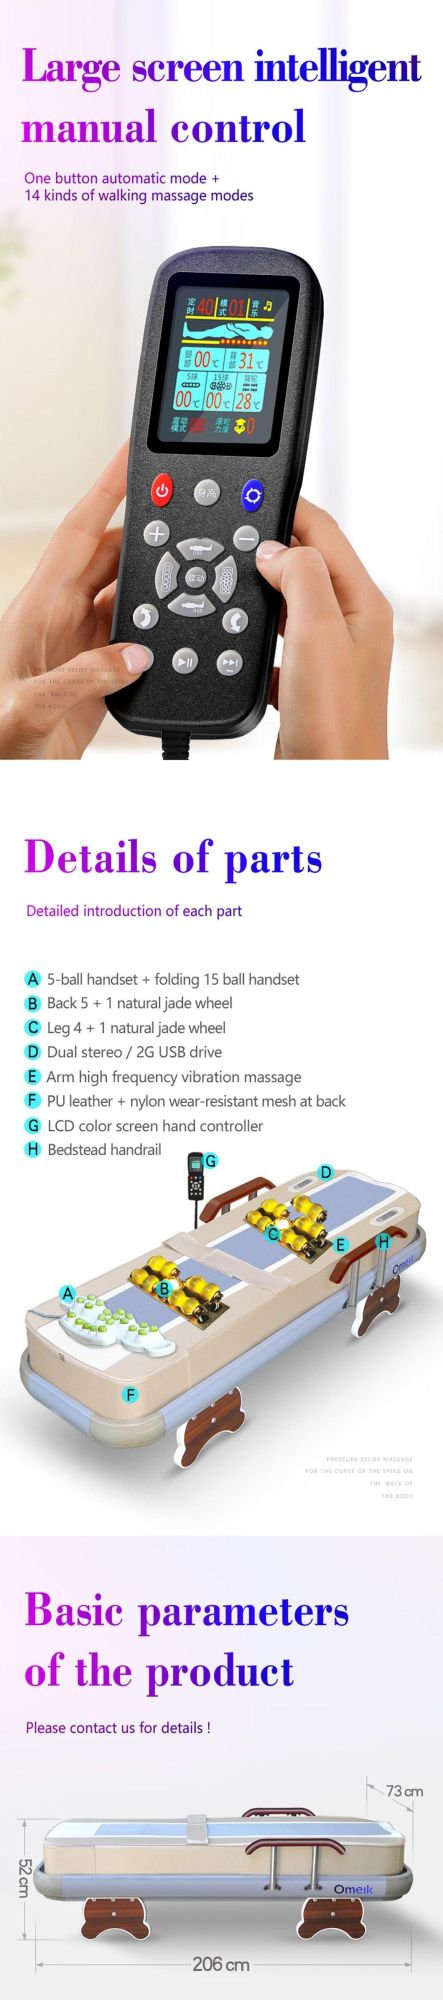 Hot Sale Infrared Therapy Physiotherapy Equipment Jade Roller Automatic Massage Bed